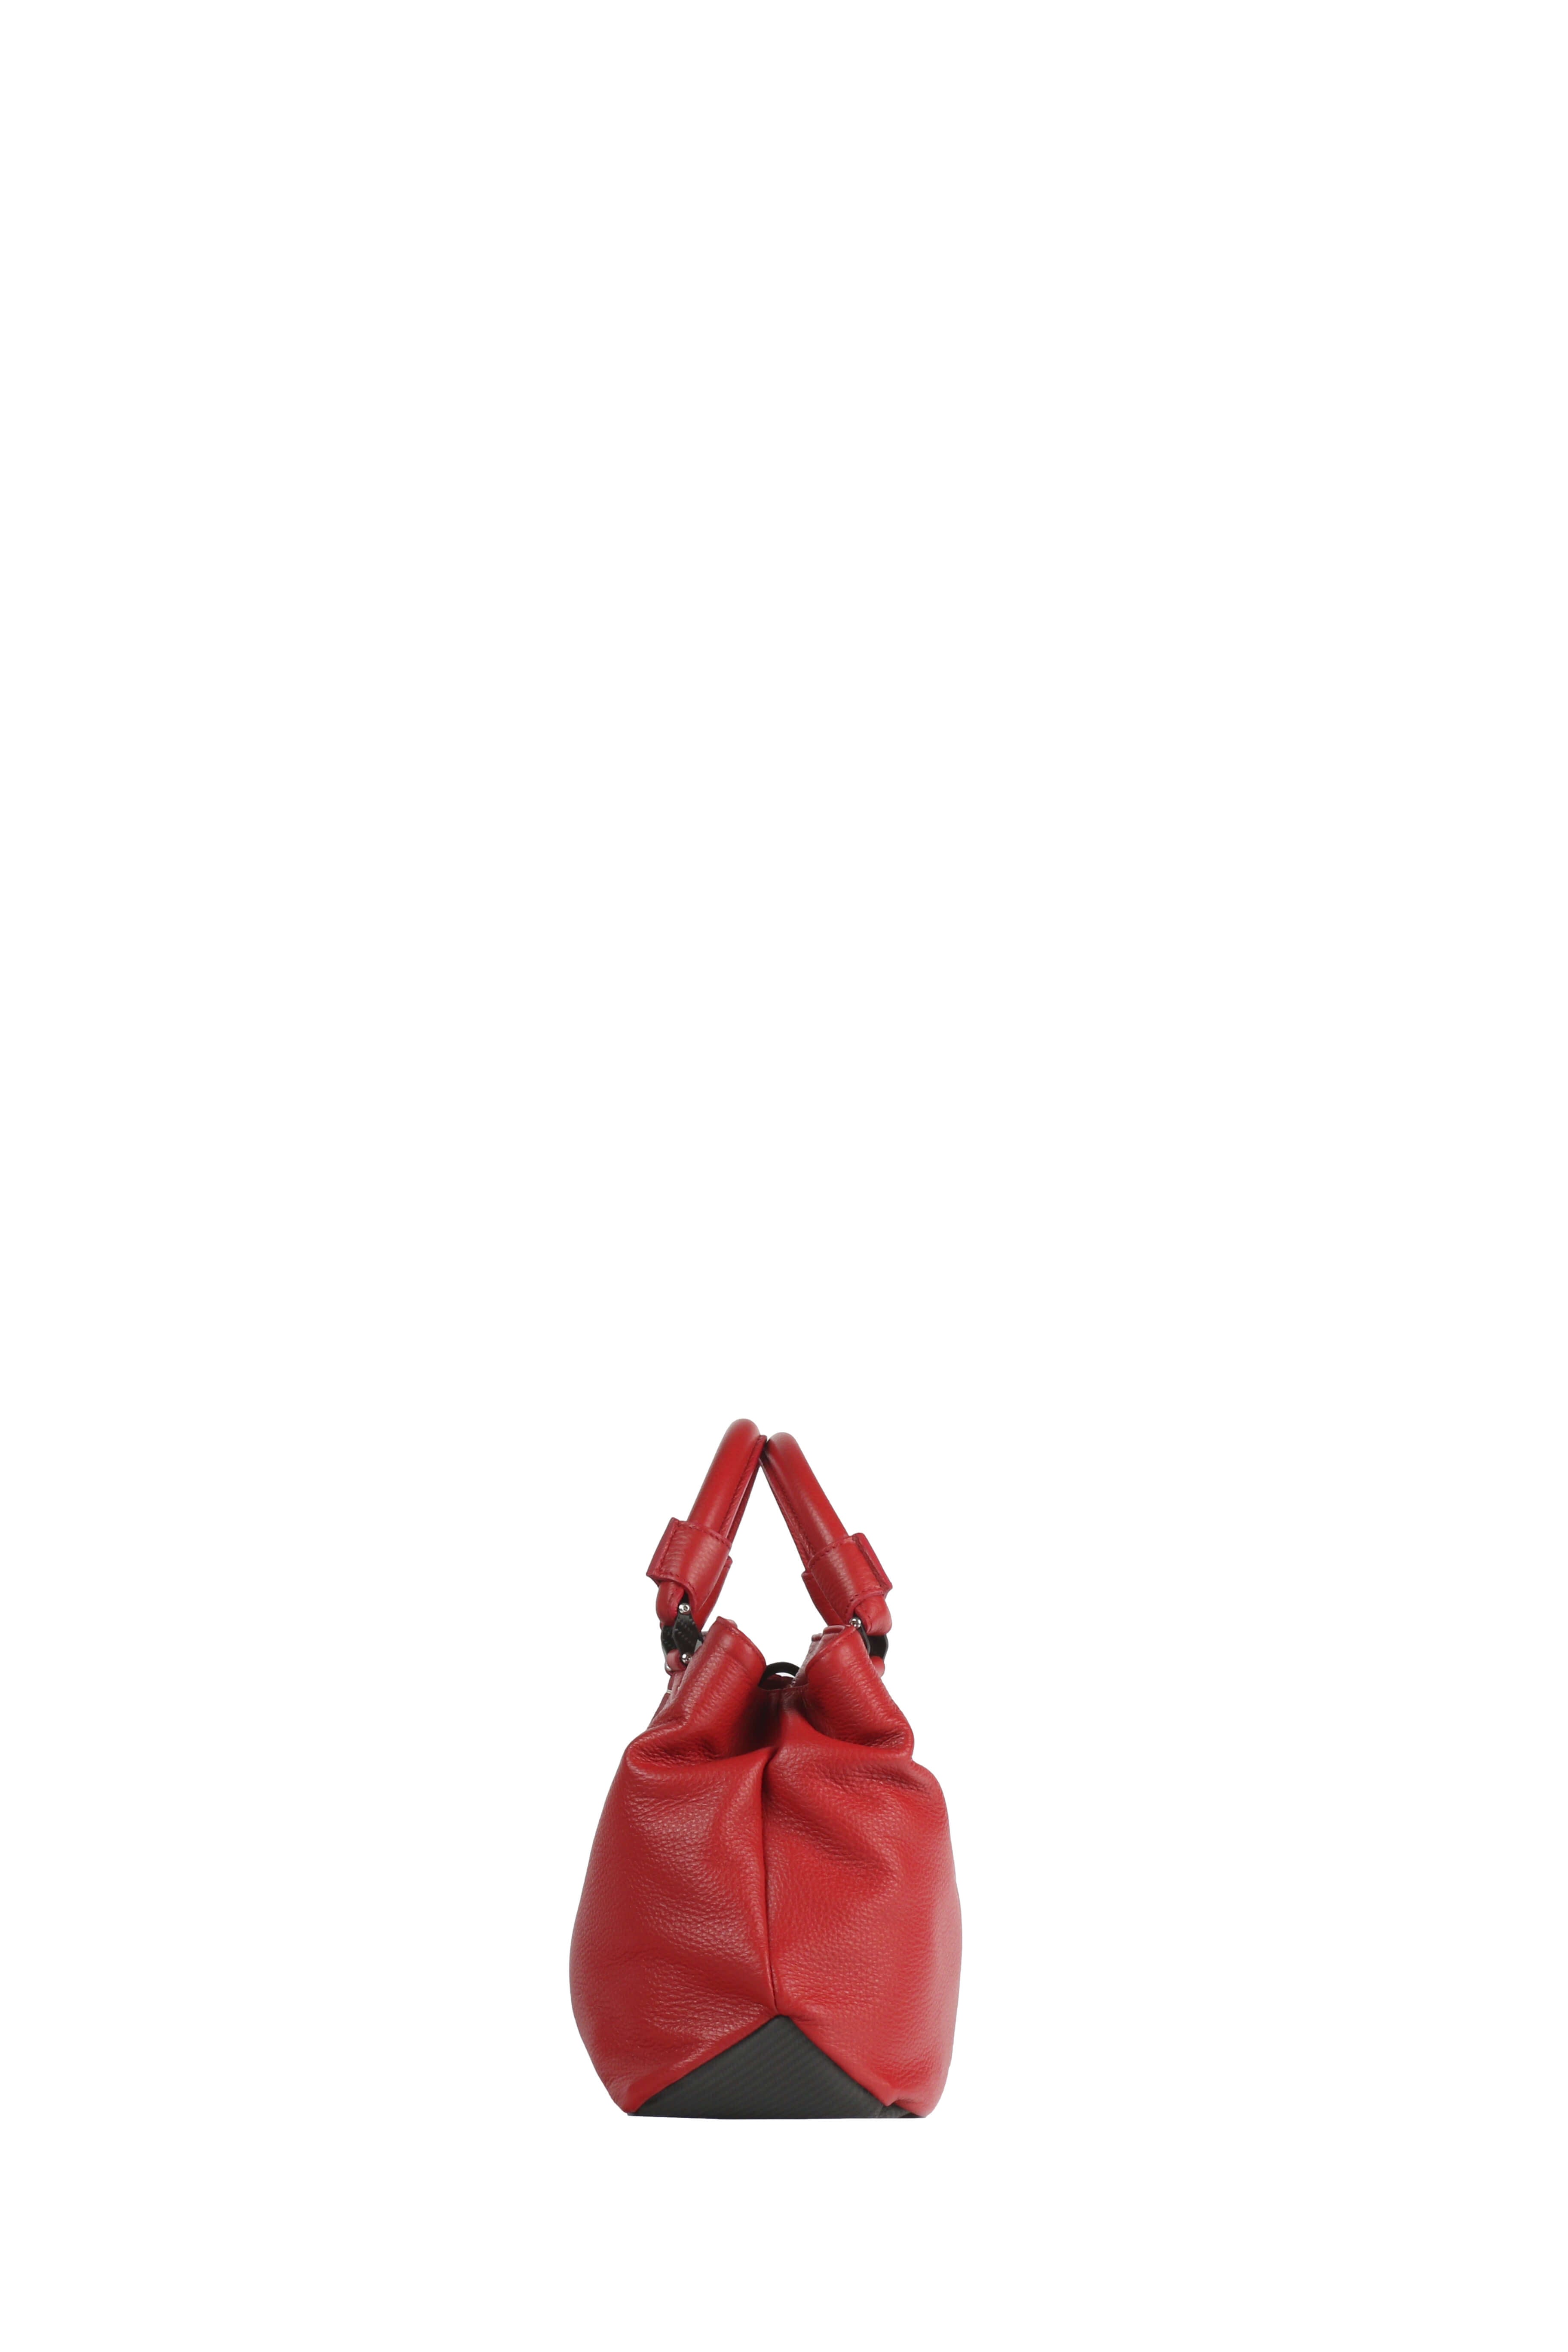 Ormeggia Deer Leather Hand Bag, Red